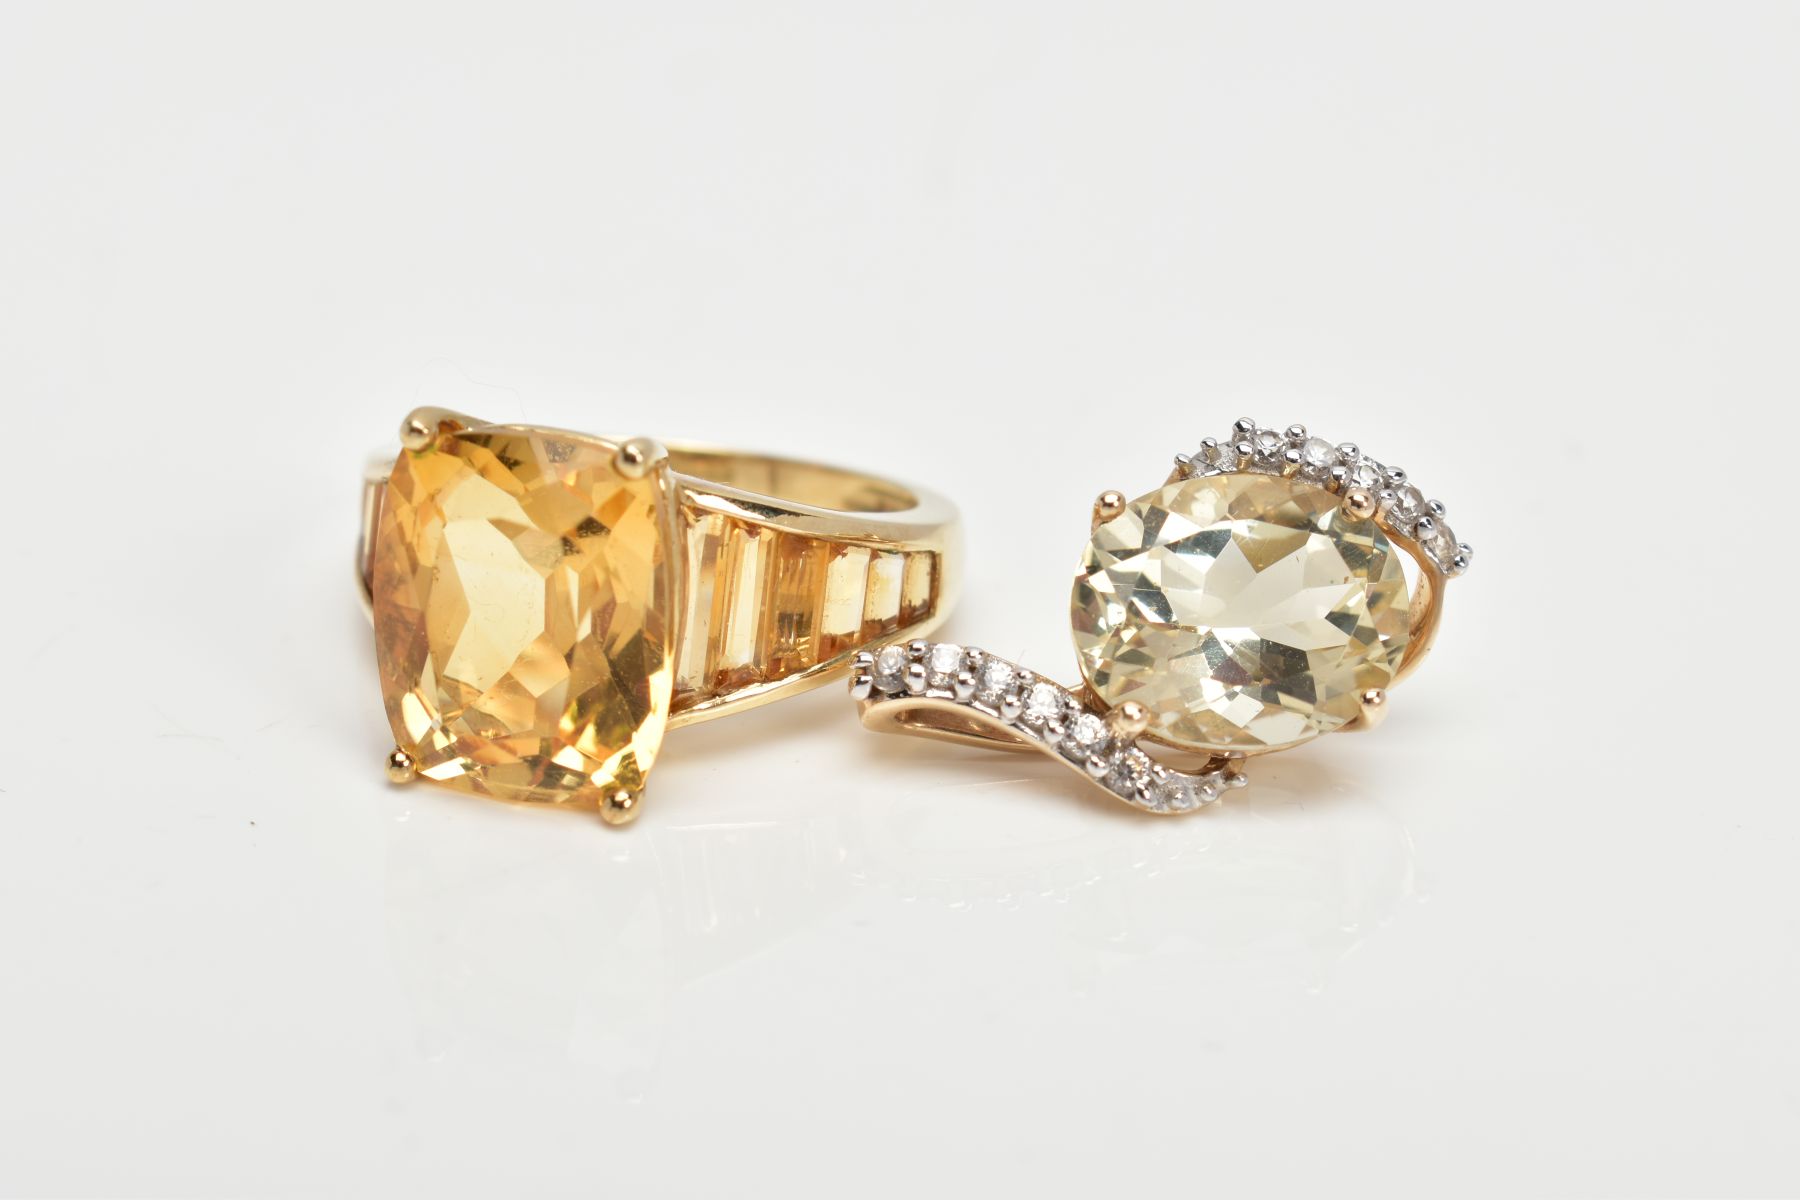 A 9CT GOLD CITRINE RING AND A PENDANT, the ring designed with a claw set, oval cut citrine, - Image 2 of 3